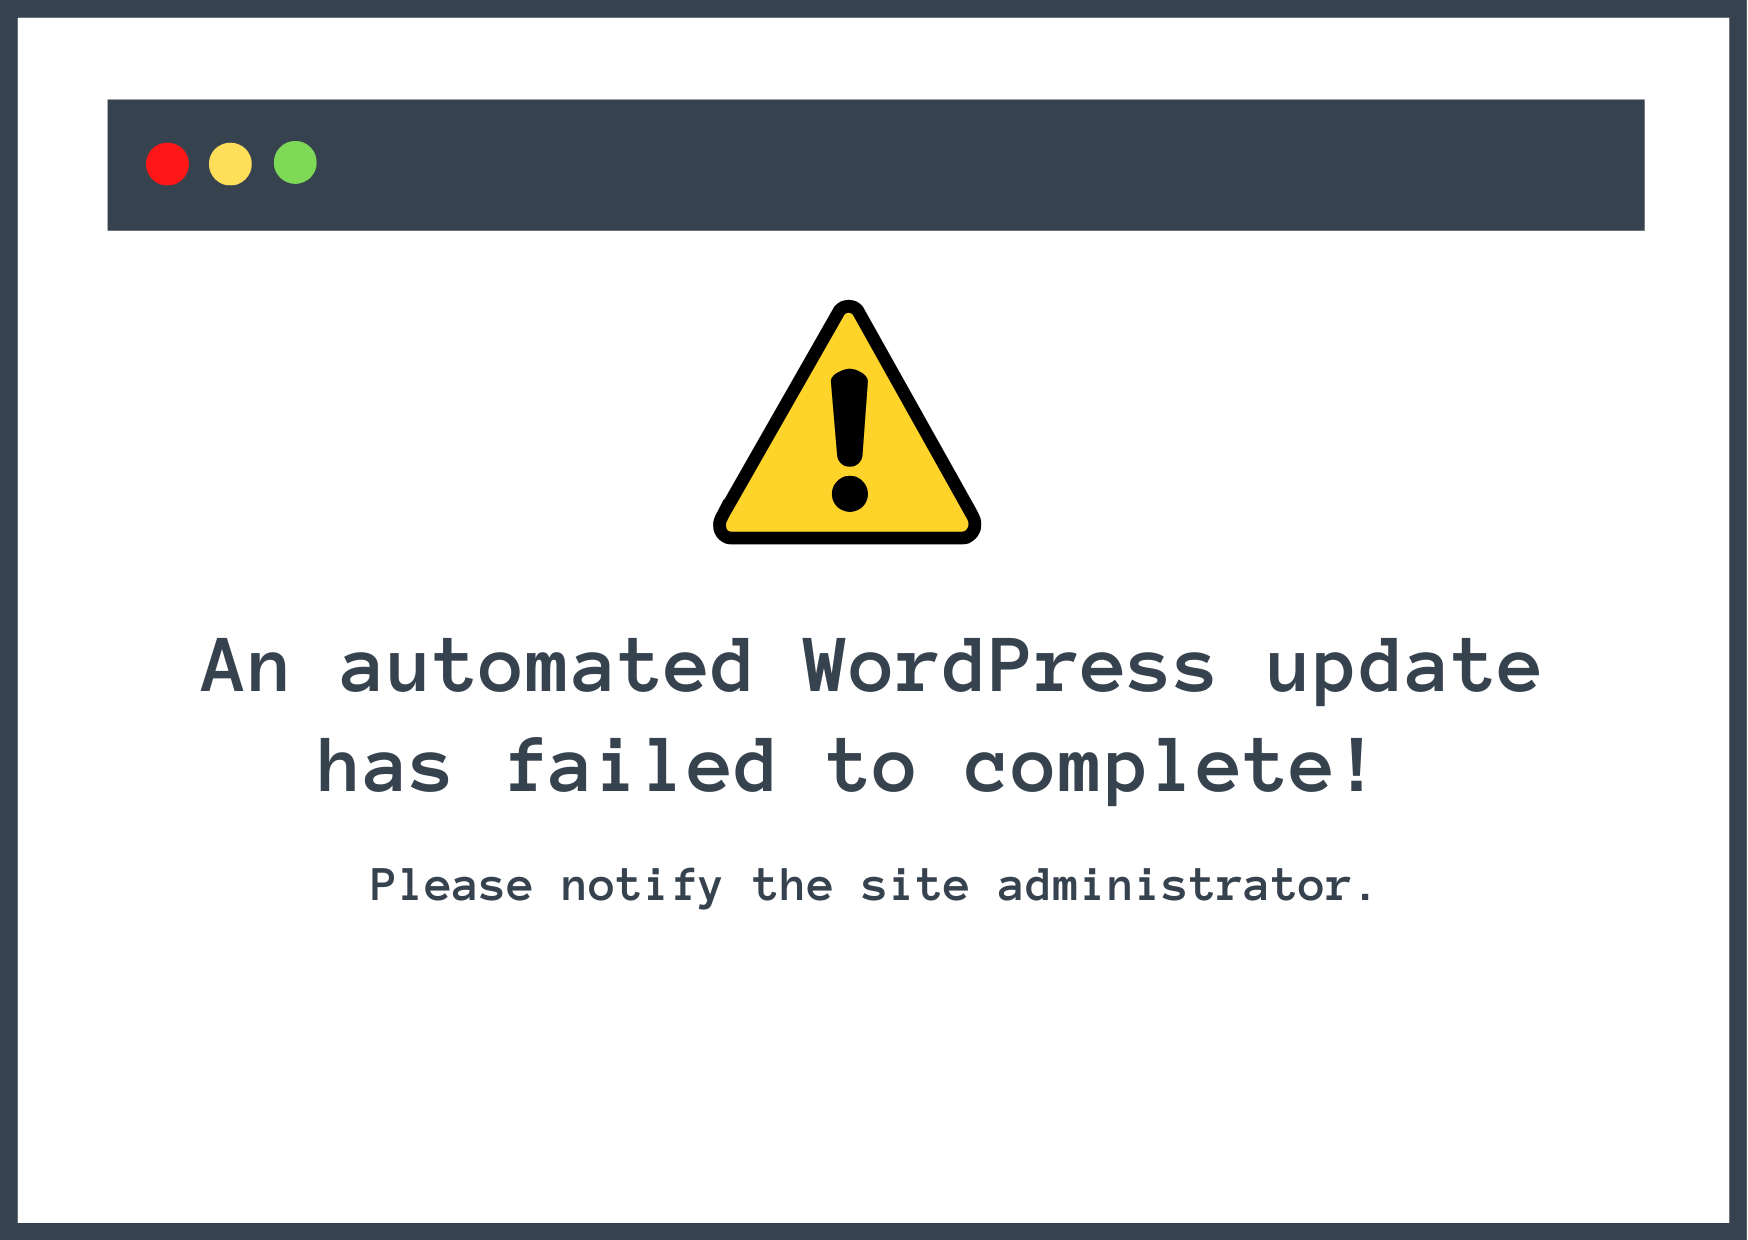 An automated WordPress update has failed to complete